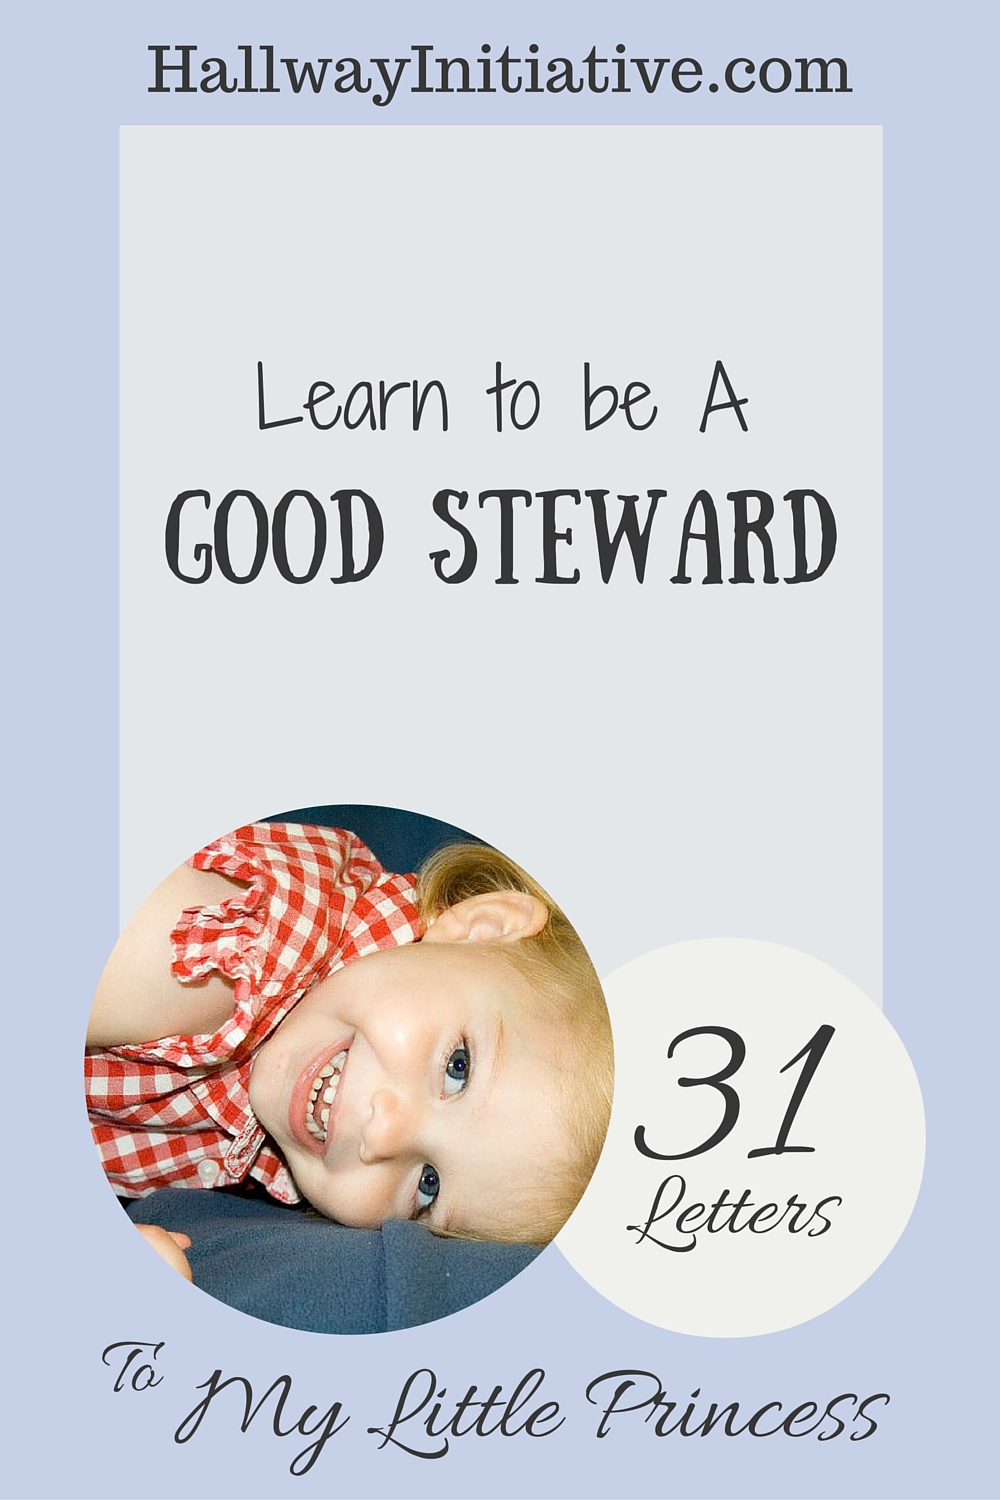 Learn to be a good steward